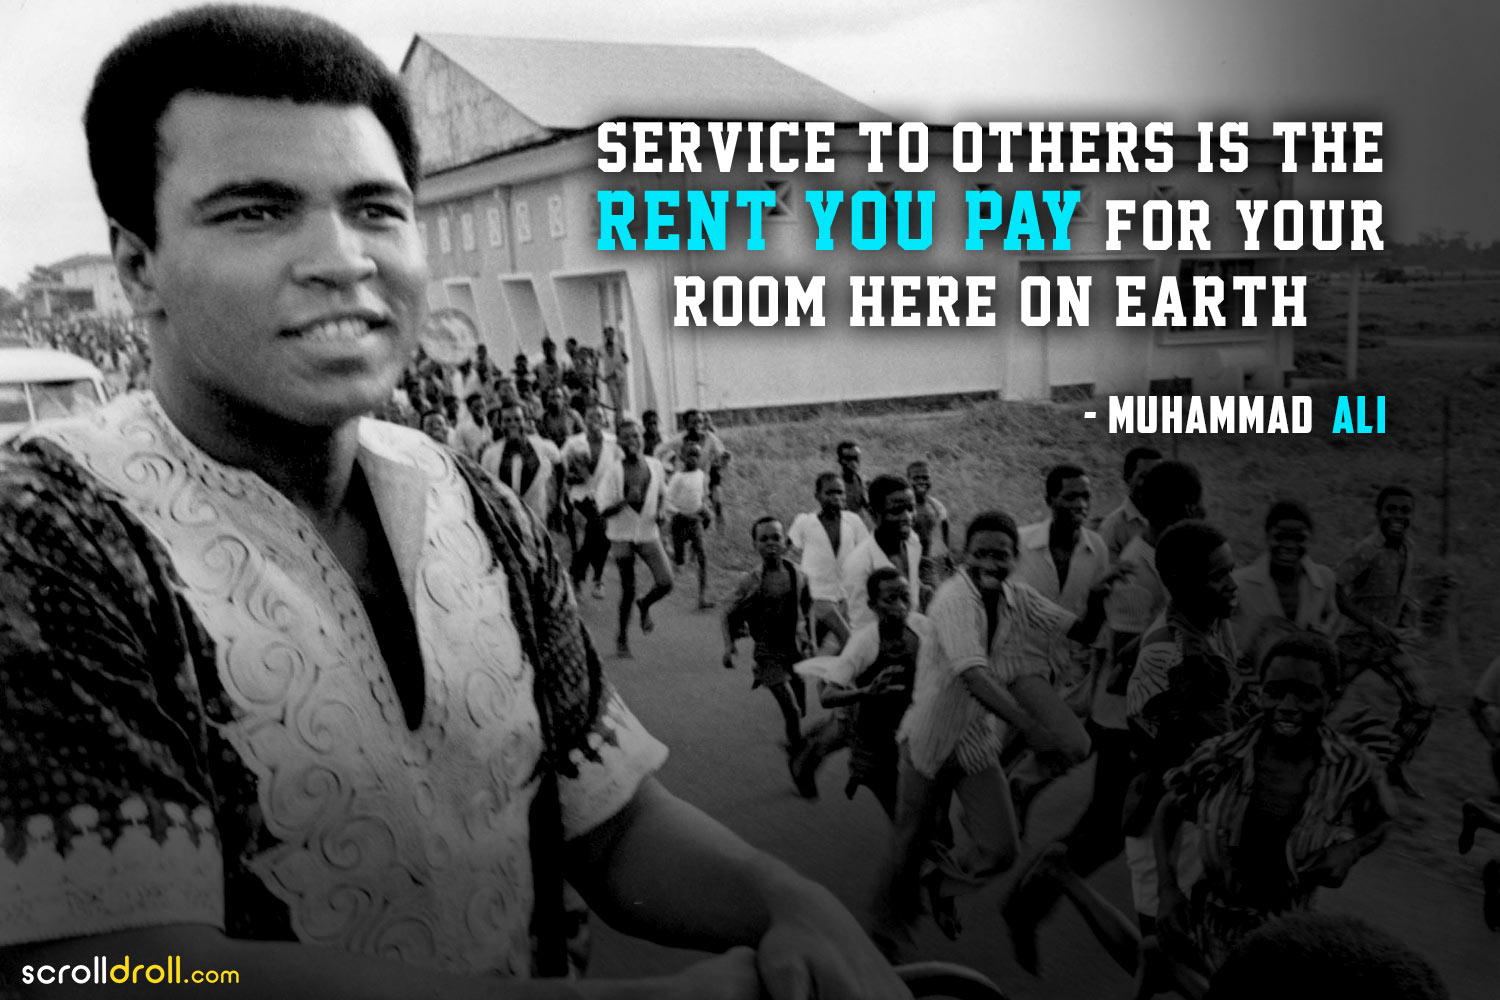 Boxer or not - These Muhammad Ali Quotes will punch you in the gut